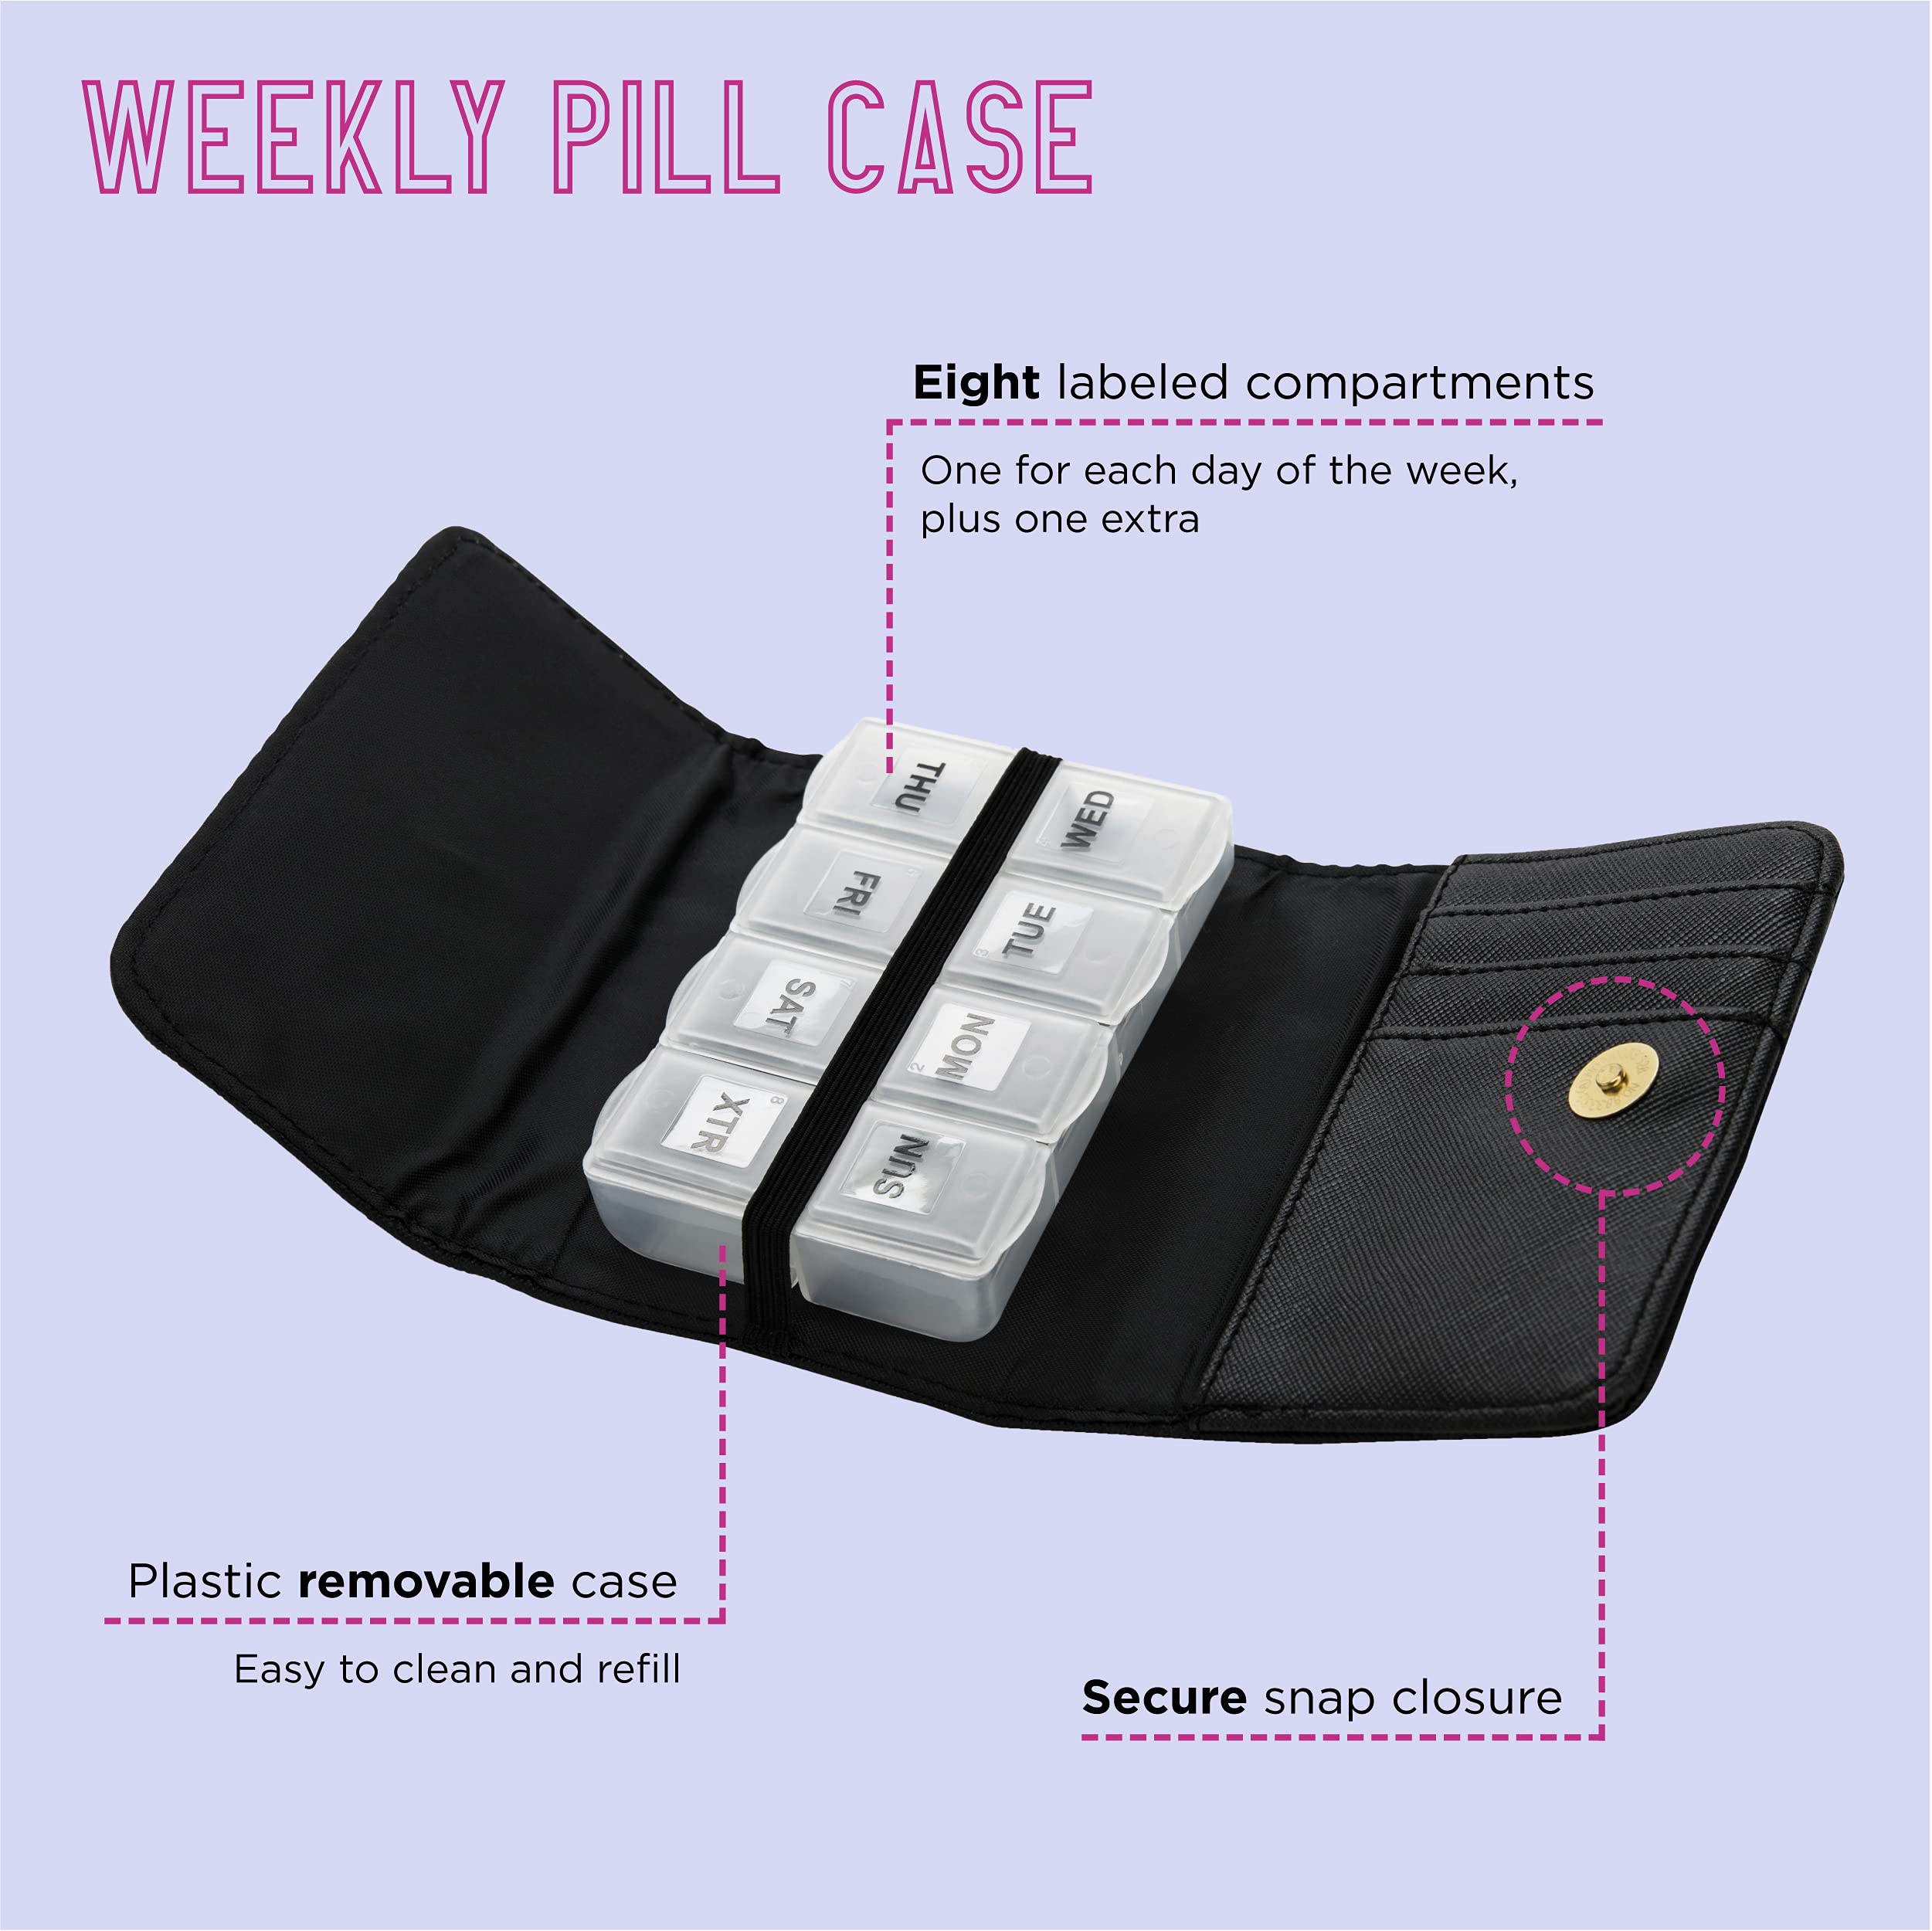 Miamica Snap Pill Case, Black, One Size, Miamica “my Pills” Snap Pill Case